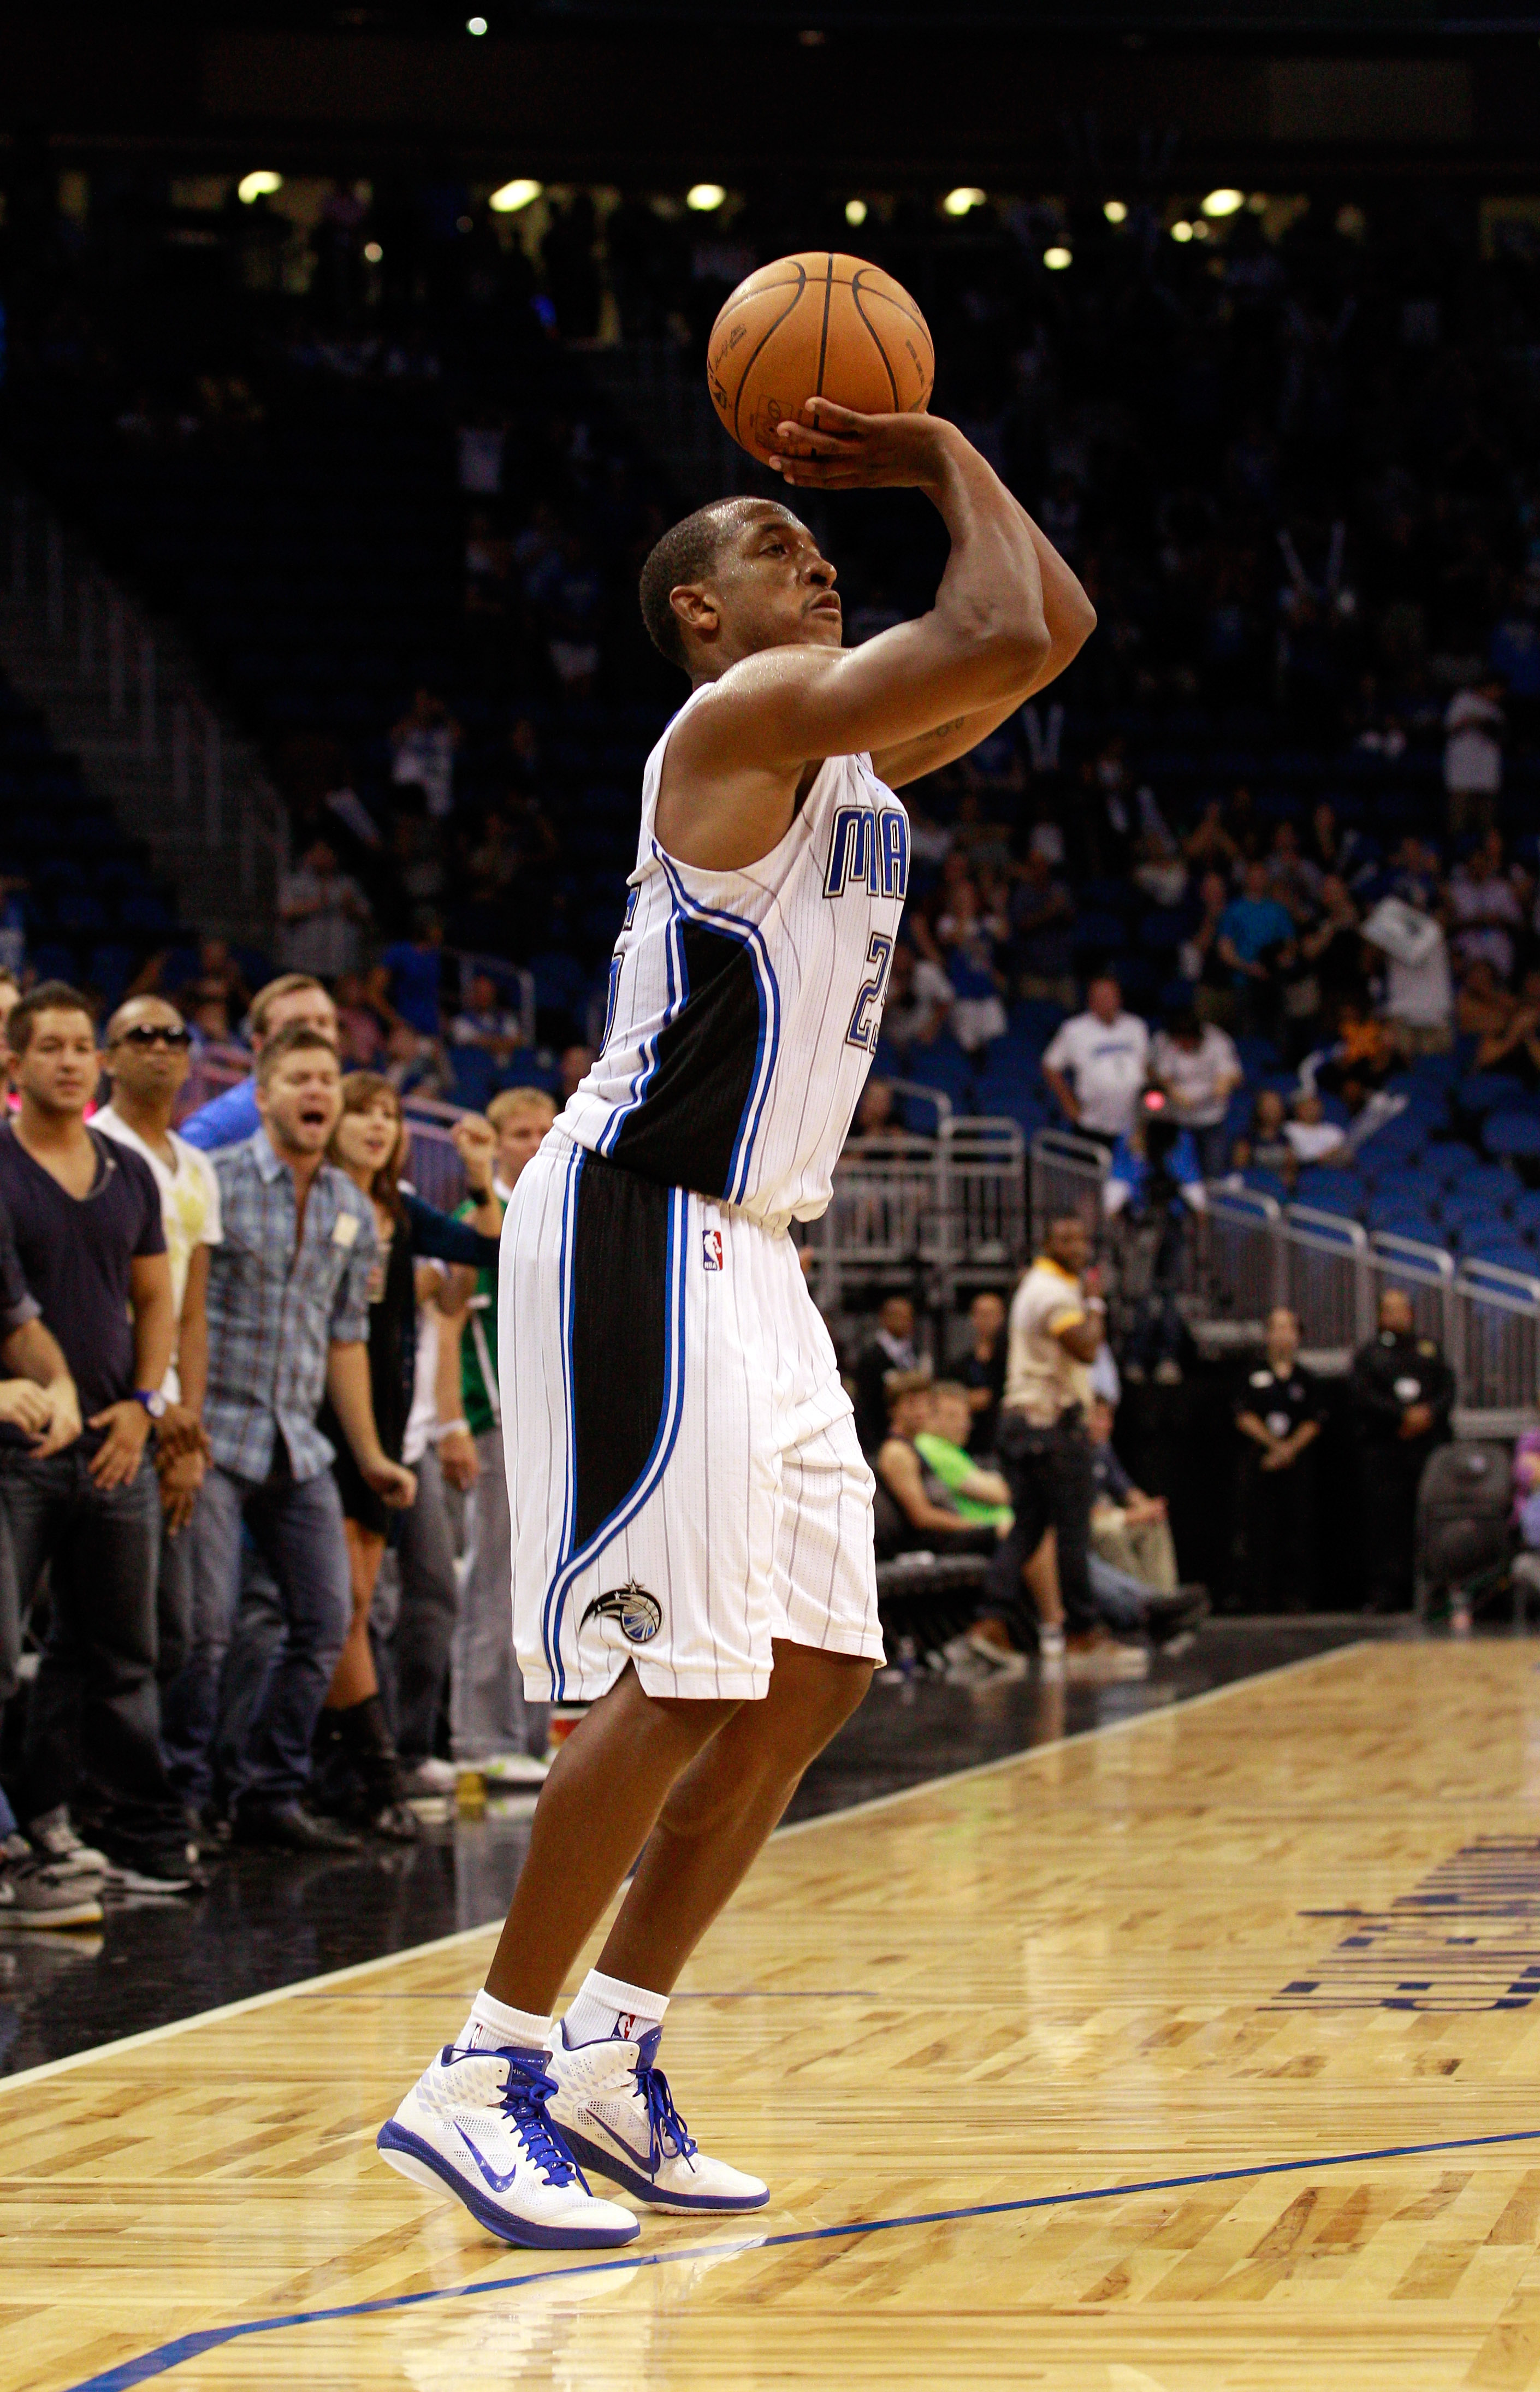 ORLANDO, FL - OCTOBER 10:  Chris Duhon #25 of the Orlando Magic attempts a shot during the game against the New Orleans Hornets at Amway Arena on October 10, 2010 in Orlando, Florida. NOTE TO USER: User expressly acknowledges and agrees that, by downloadi